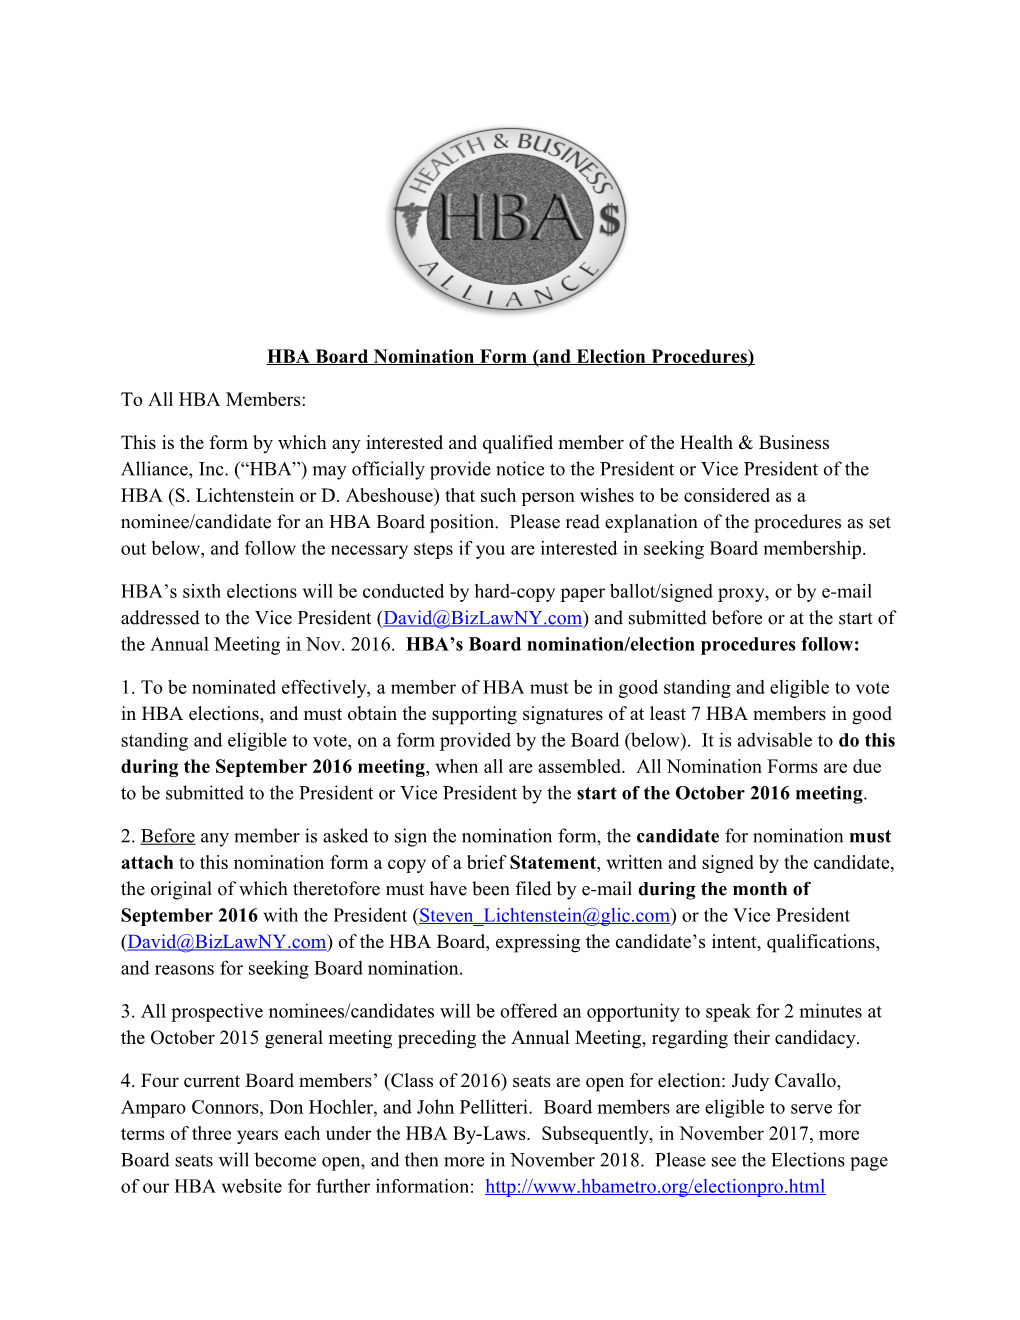 HBA Board Nomination Form (And Election Procedures)